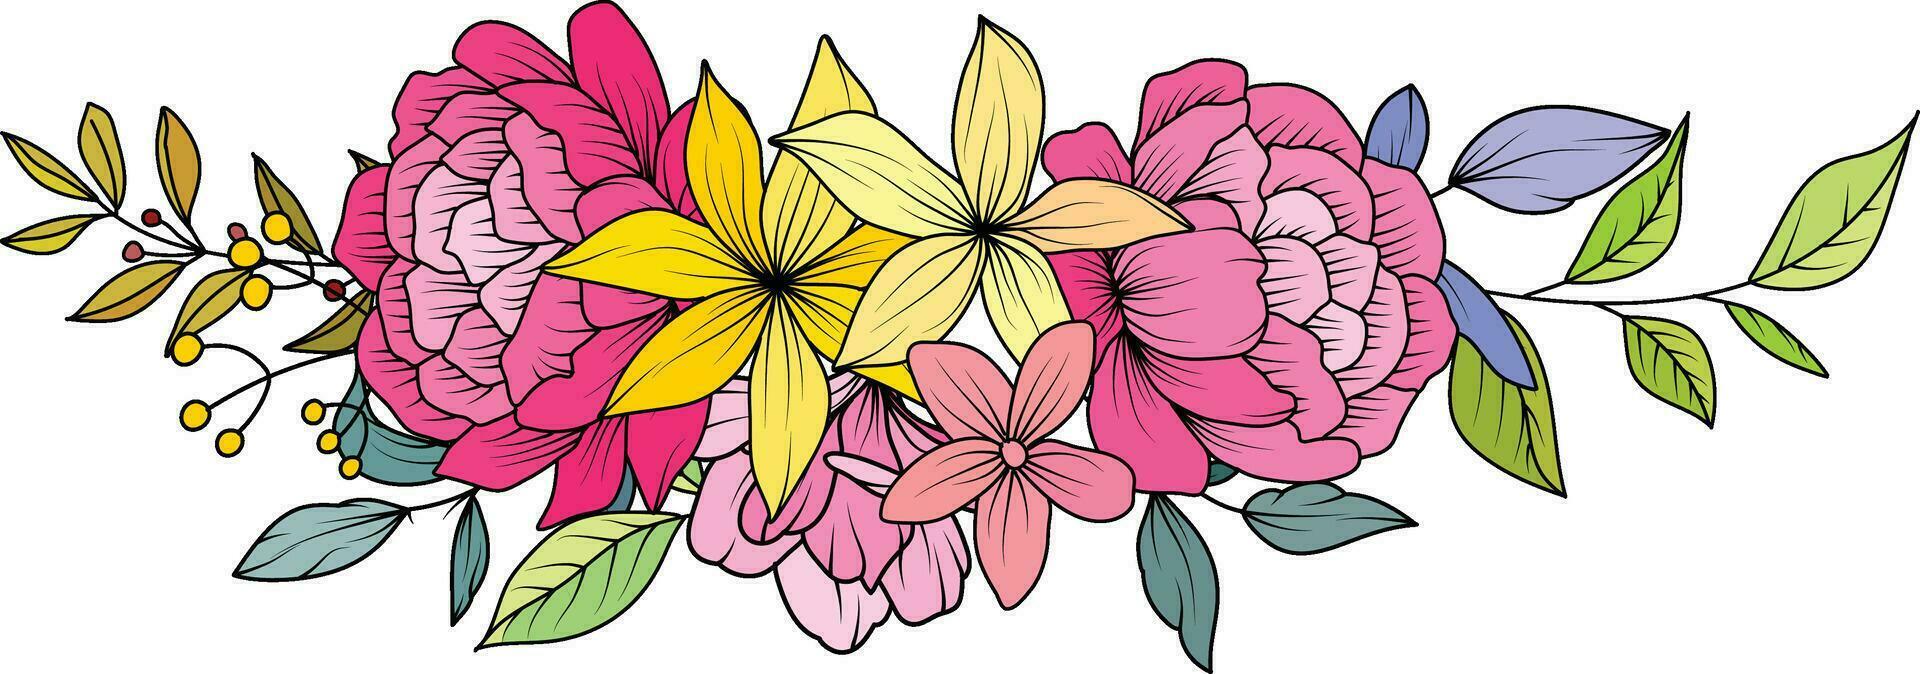 Bouquet of colorful flowers set for invitation, greeting card, poster, frame, wedding, decoration vector